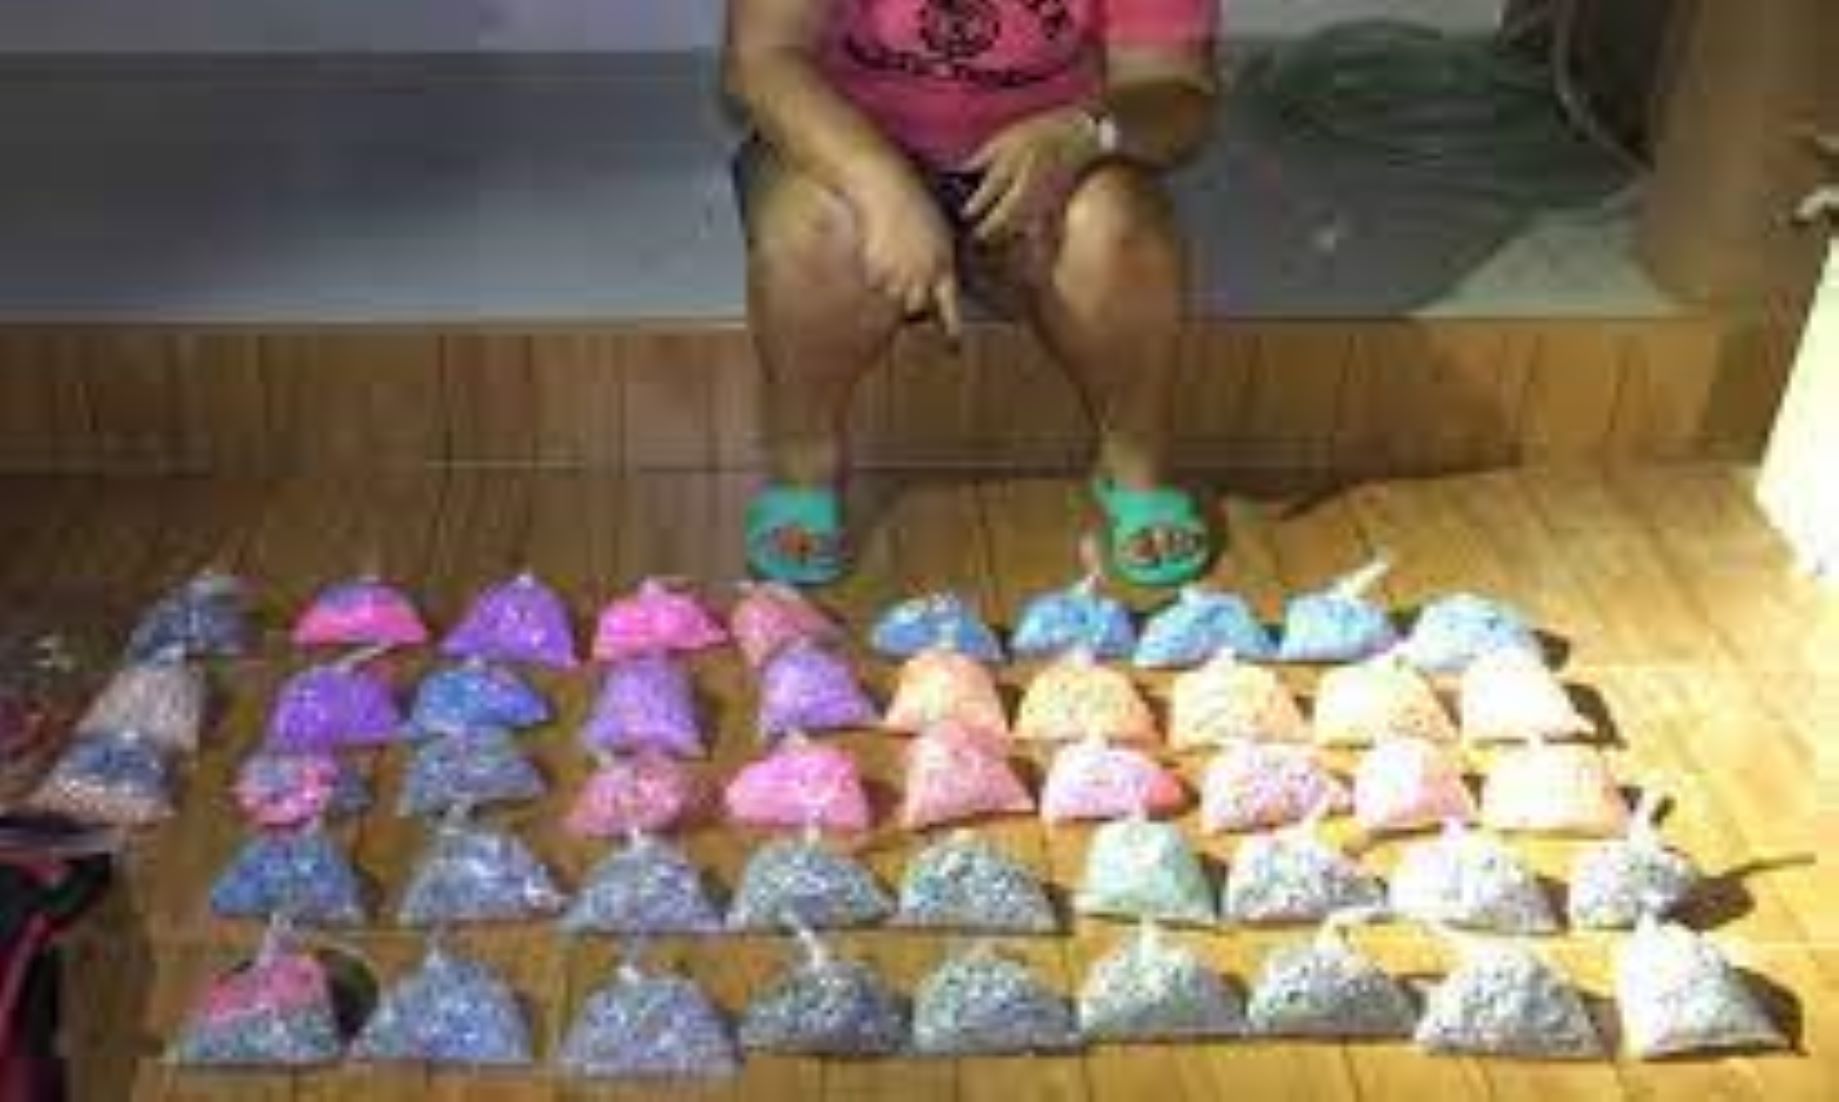 Over 100,000 Ecstasy Pills Confiscated In Indonesia